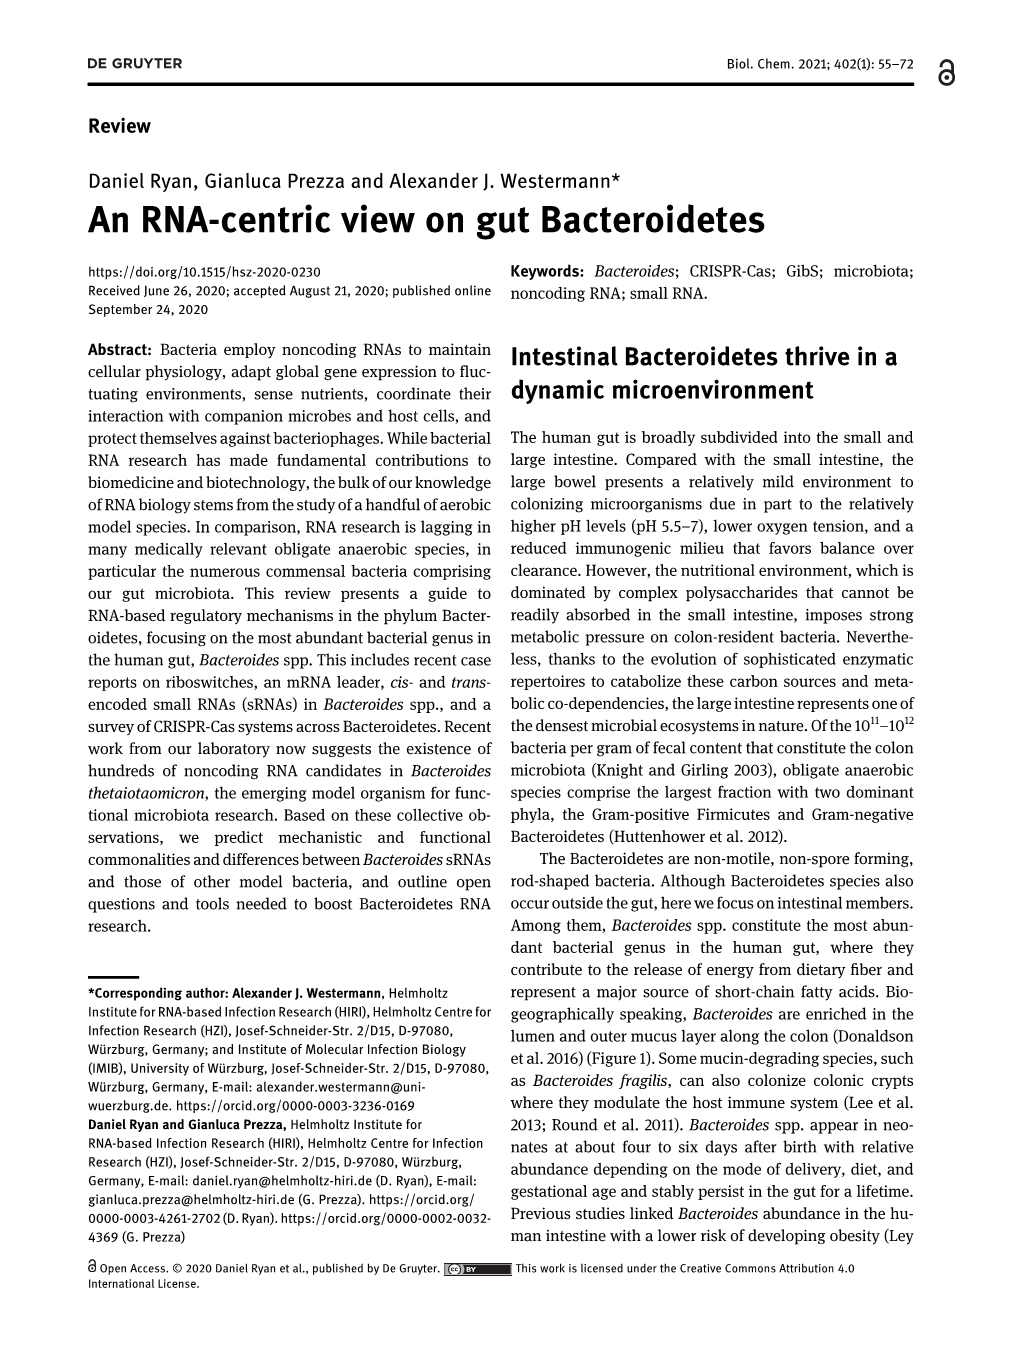 An RNA-Centric View on Gut Bacteroidetes